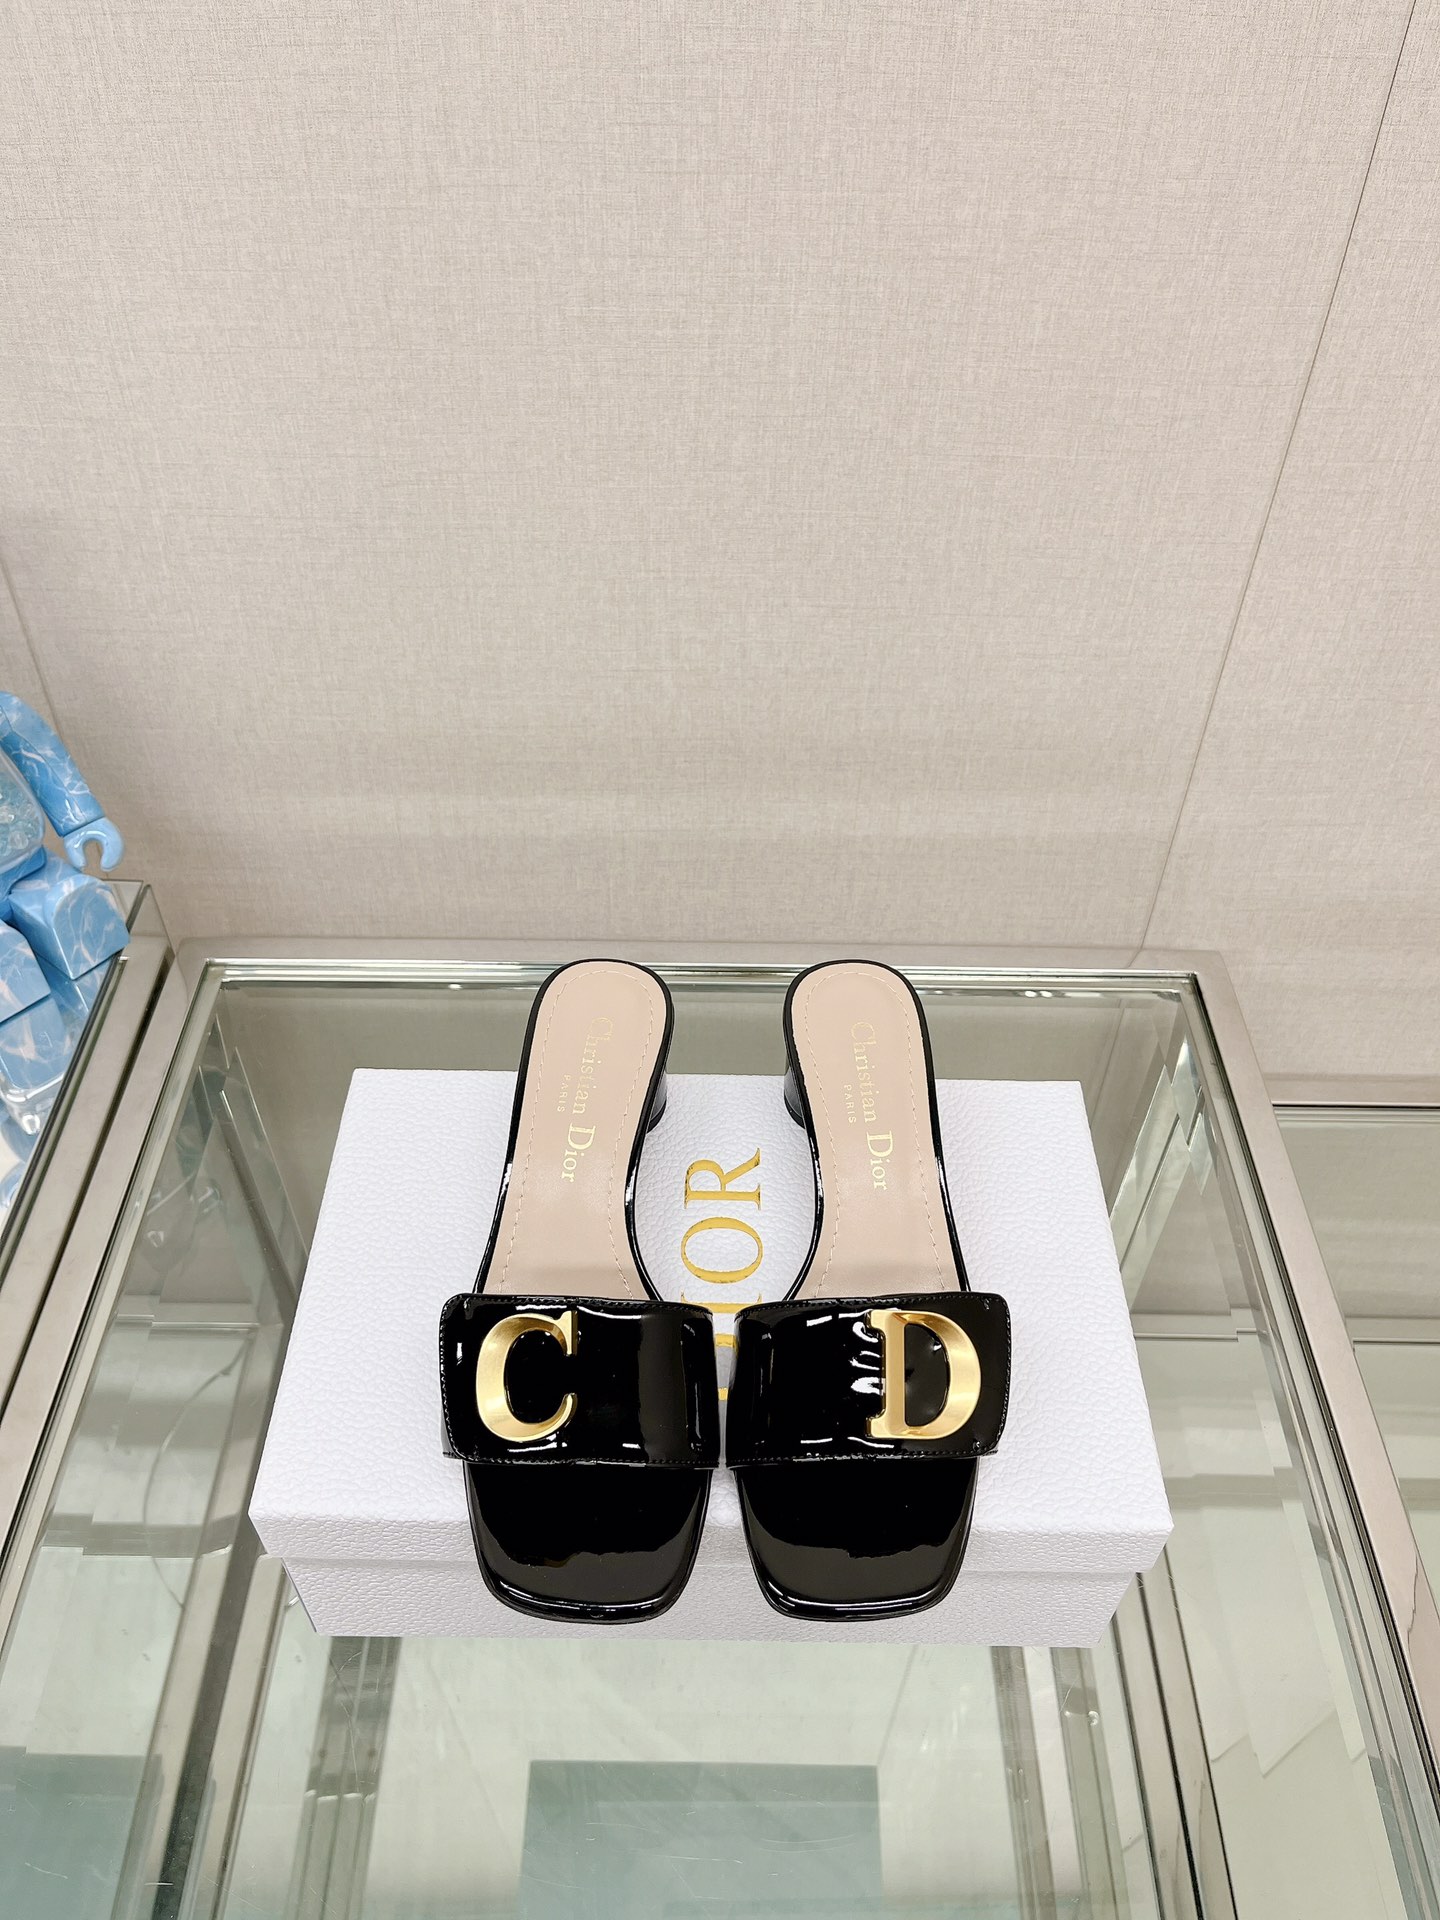 Dior Shoes High Heel Pumps Slippers Only sell high-quality
 Gold Cowhide Genuine Leather Patent Sheepskin Velvet Fall Collection Fashion